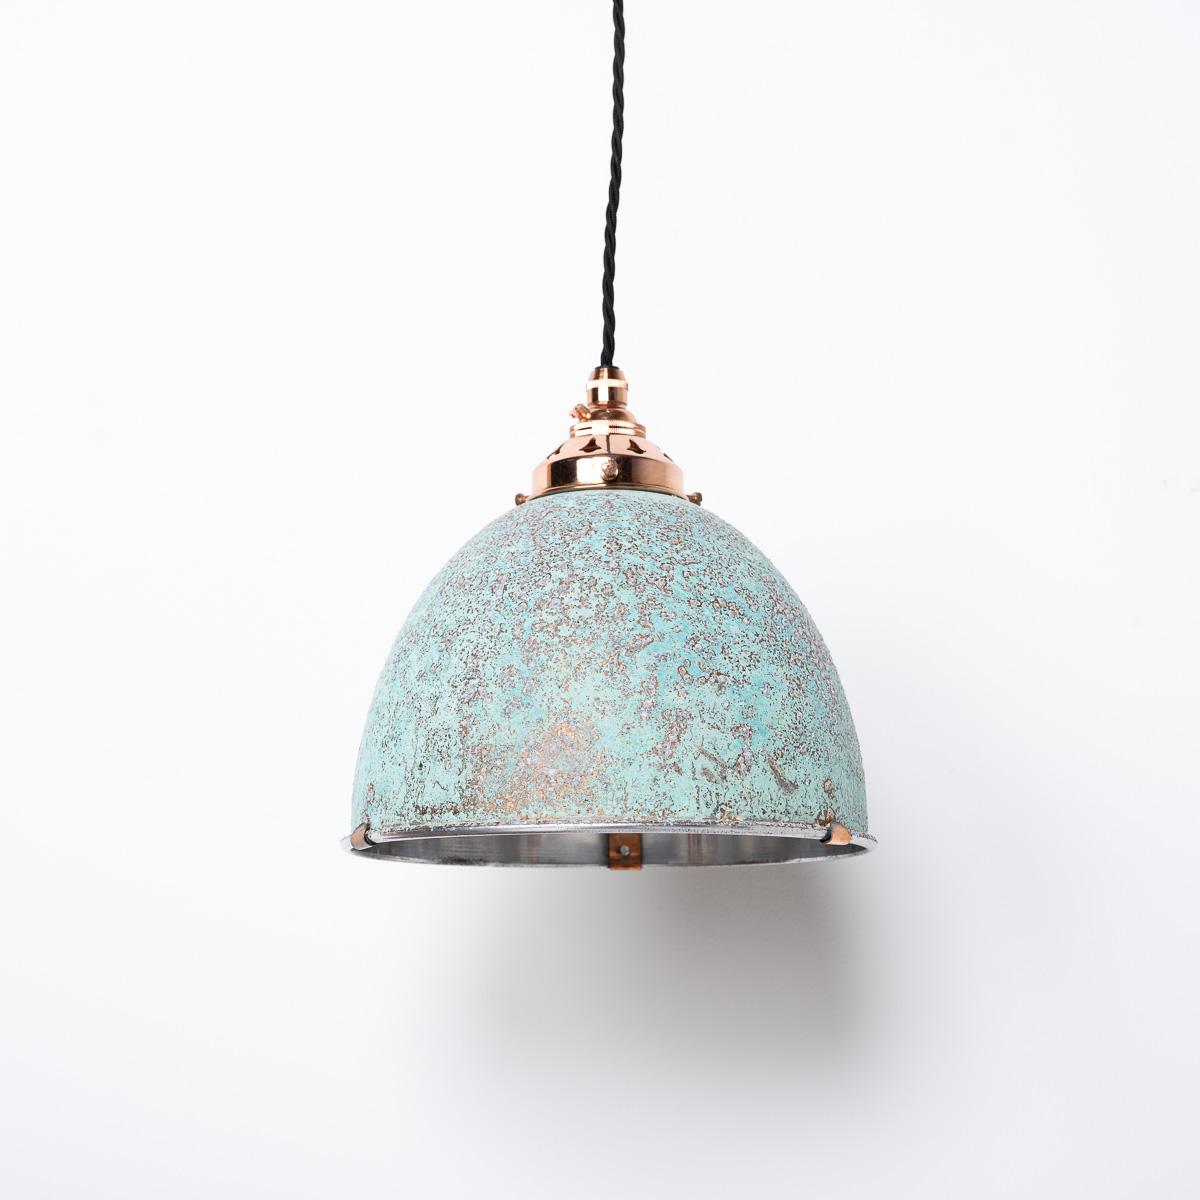 RECLAIMED HOLOPHANE VERDIGRIS PENDANT LIGHTS
A fab run of vintage Holophane spun aluminium shades with polished copper fittings.

Theses original Holophane shades have been painted on the exterior with a special copper based paint and then aged up